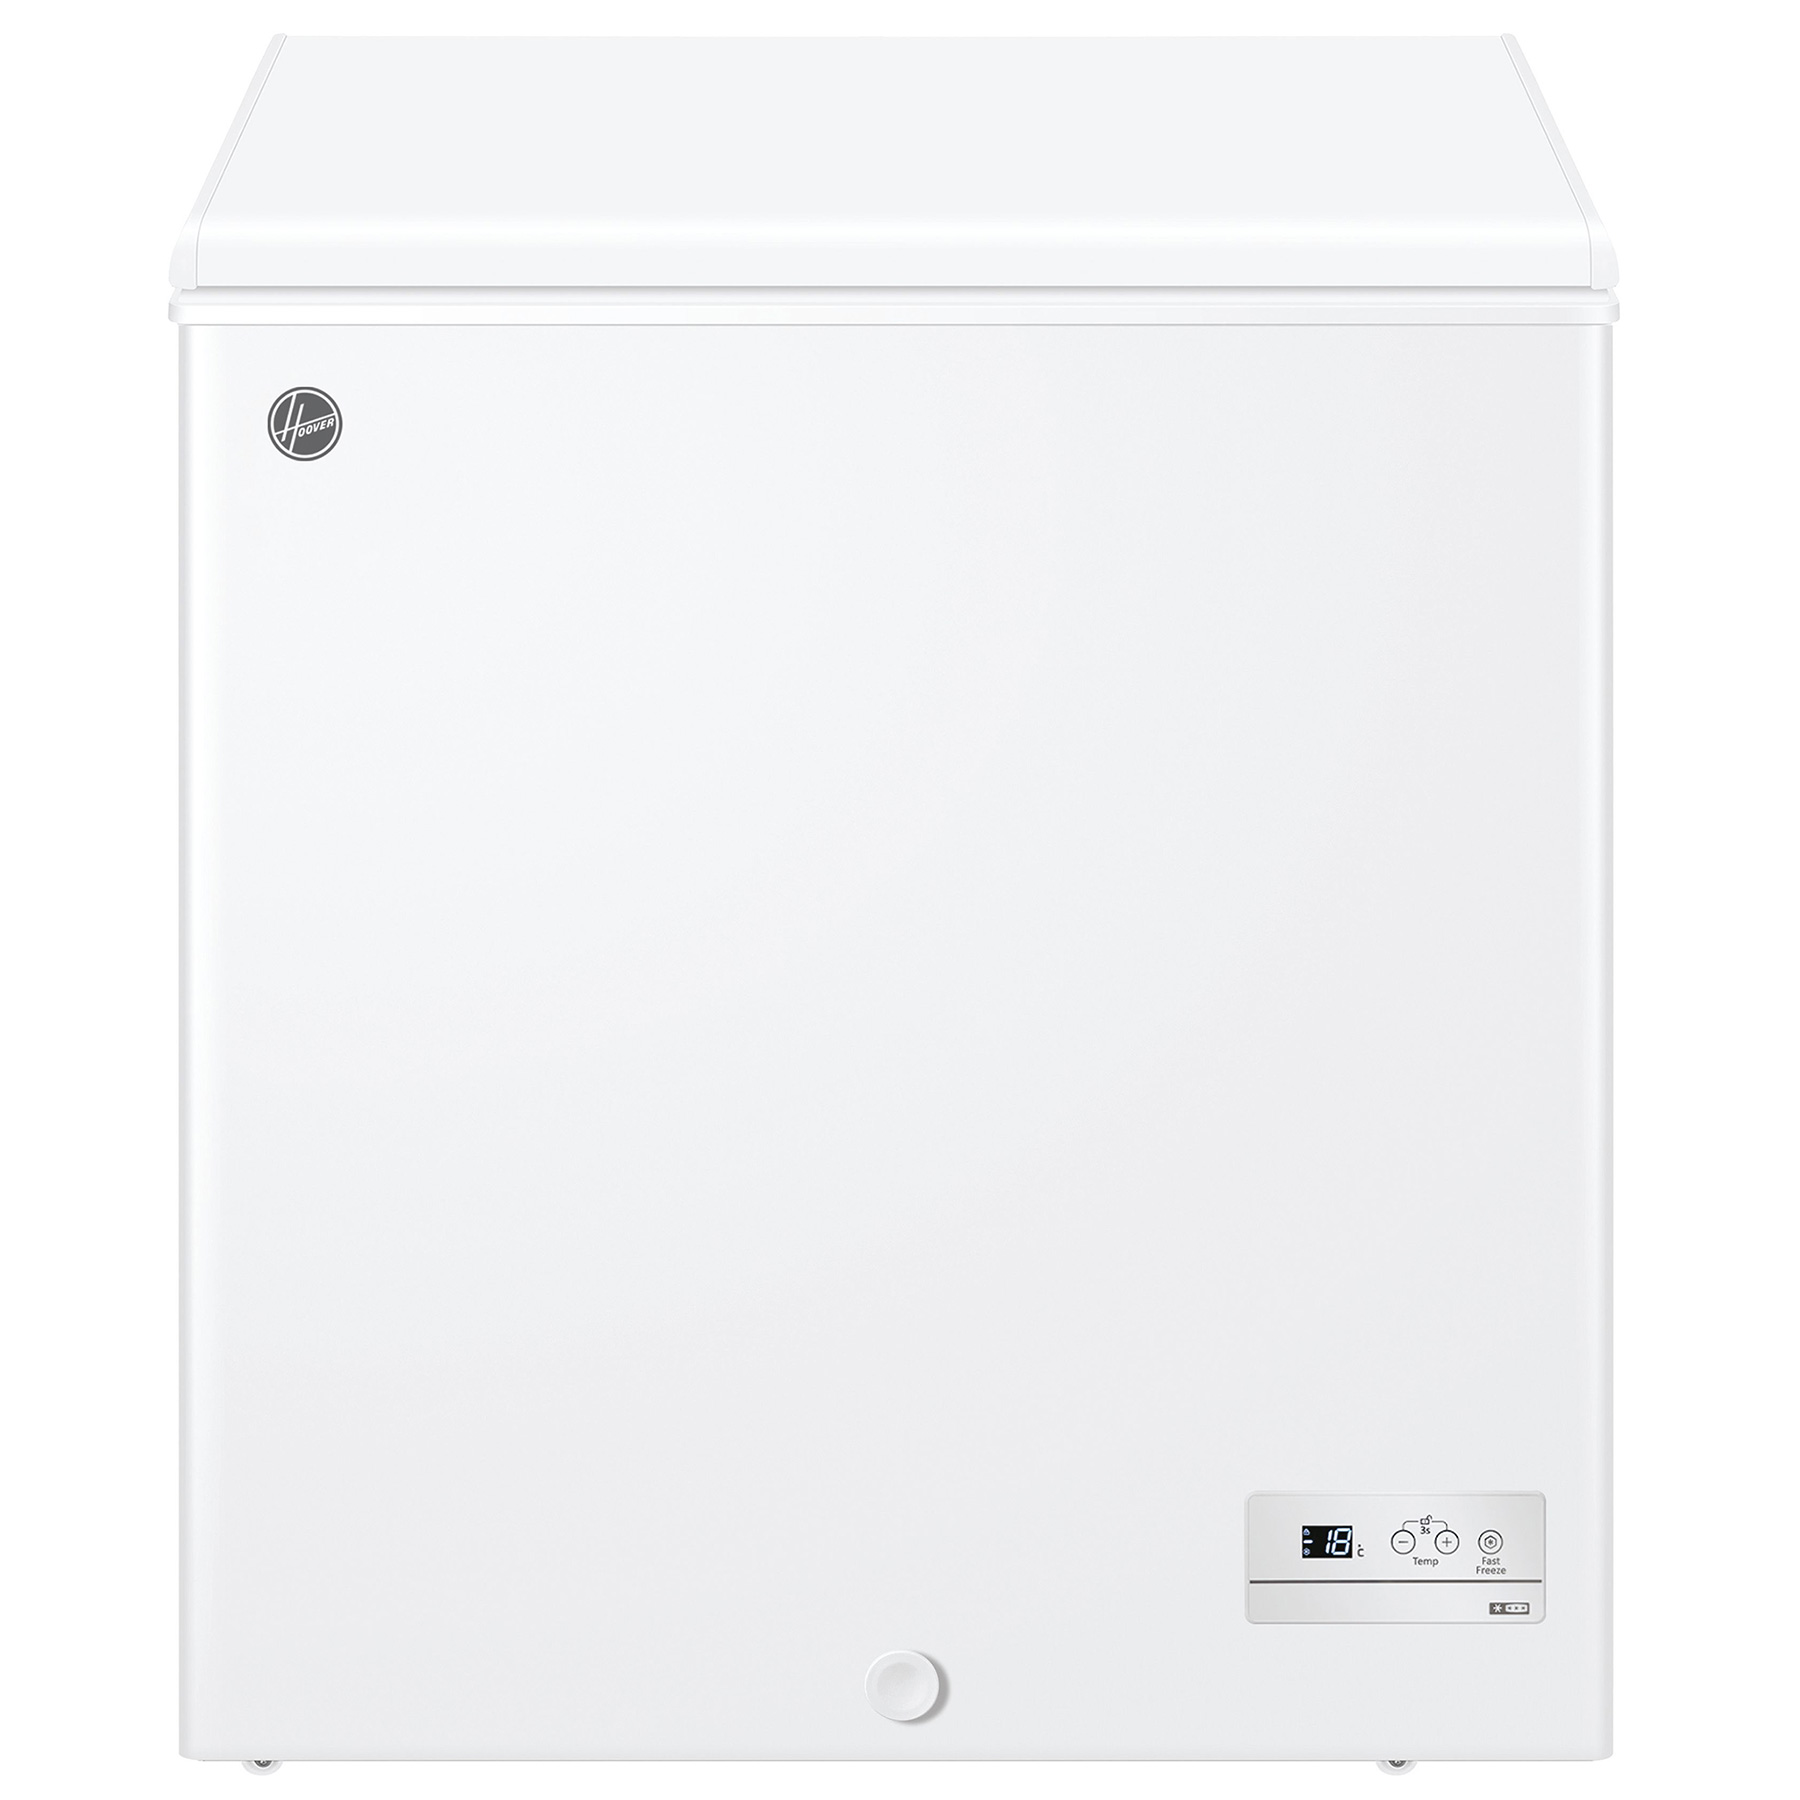 Image of Hoover HHCH152EL 72cm Chest Freezer in White 142 Litre 0 85m F Rated